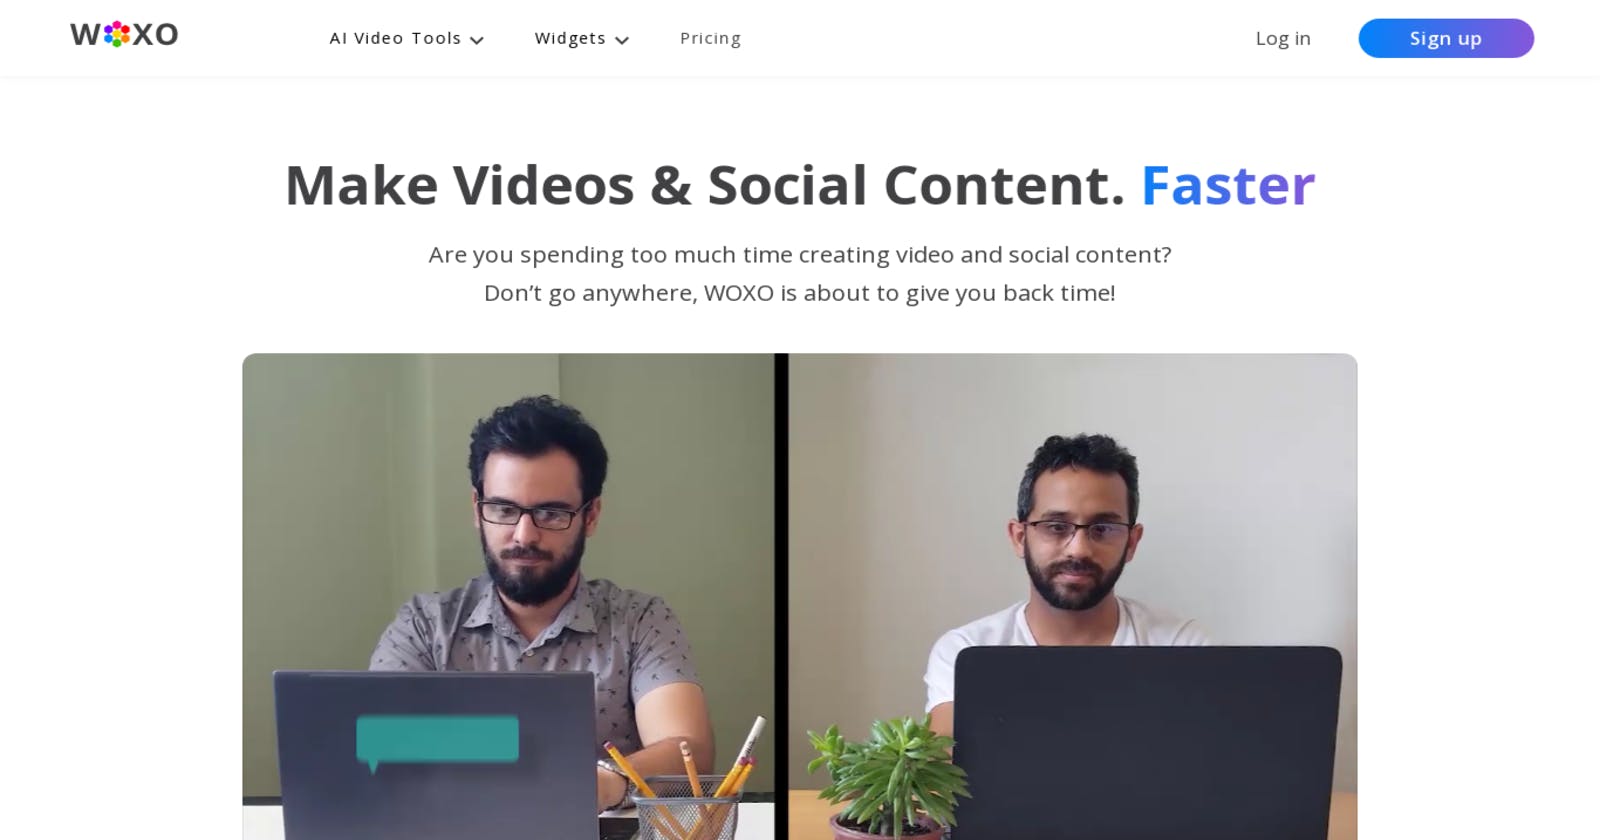 Create Videos & Social Content Faster with Woxo